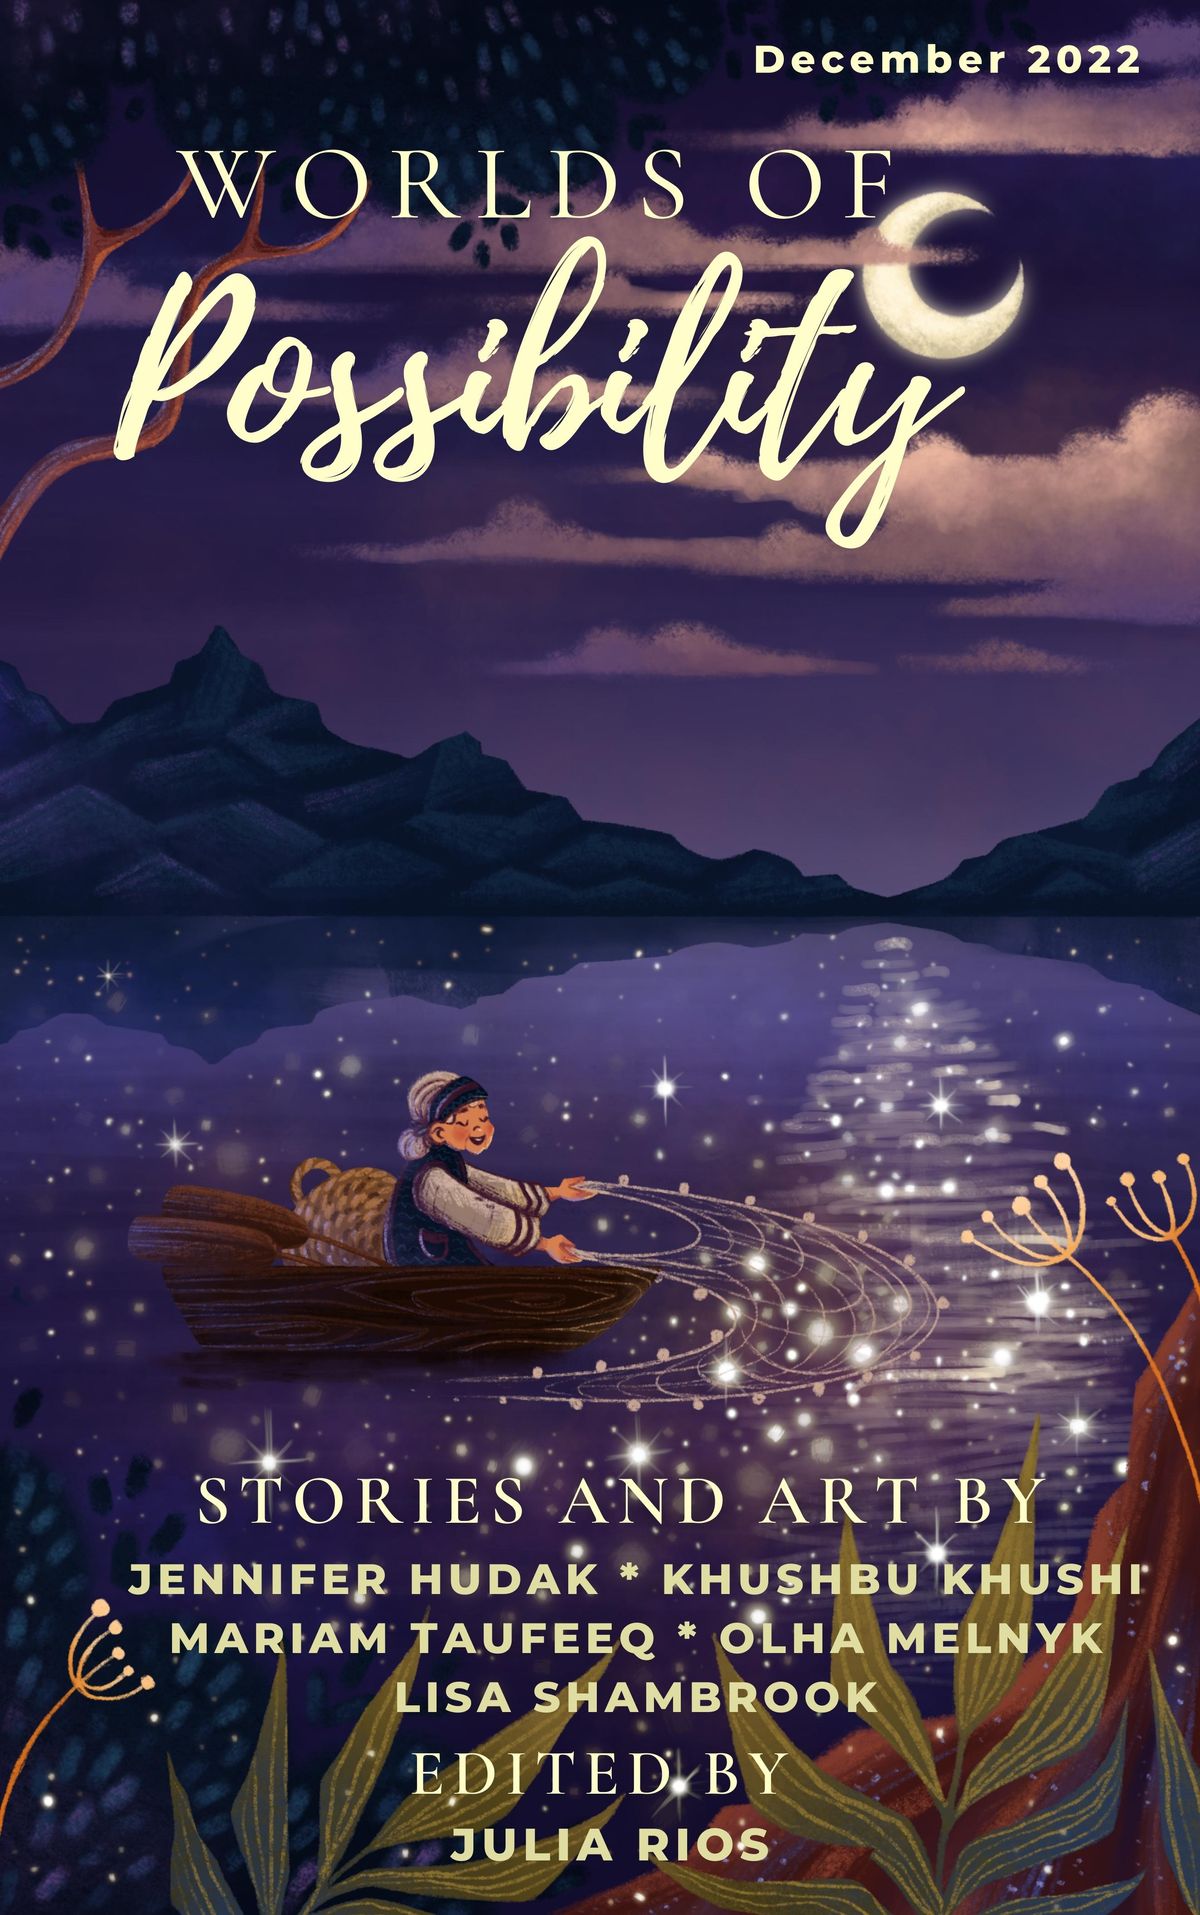 Introducing the December 2022 issue of Worlds of Possibility